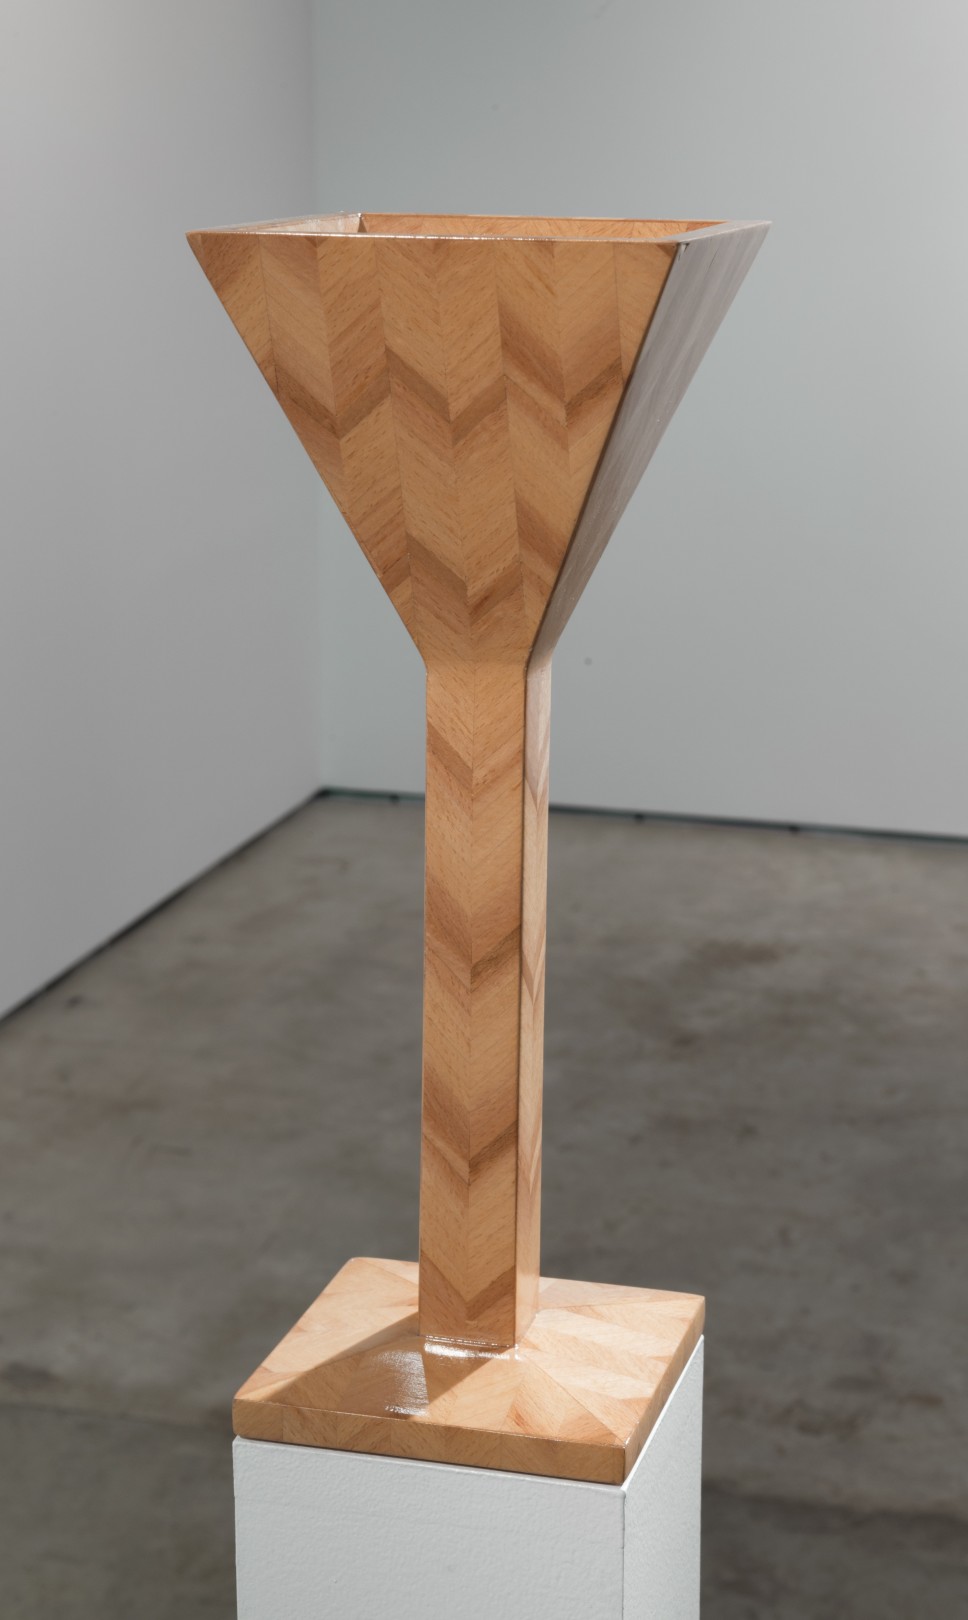 Haig Aivazian, Why Should Fear Seize the Limbs Before the Warning Sounds?, 2014